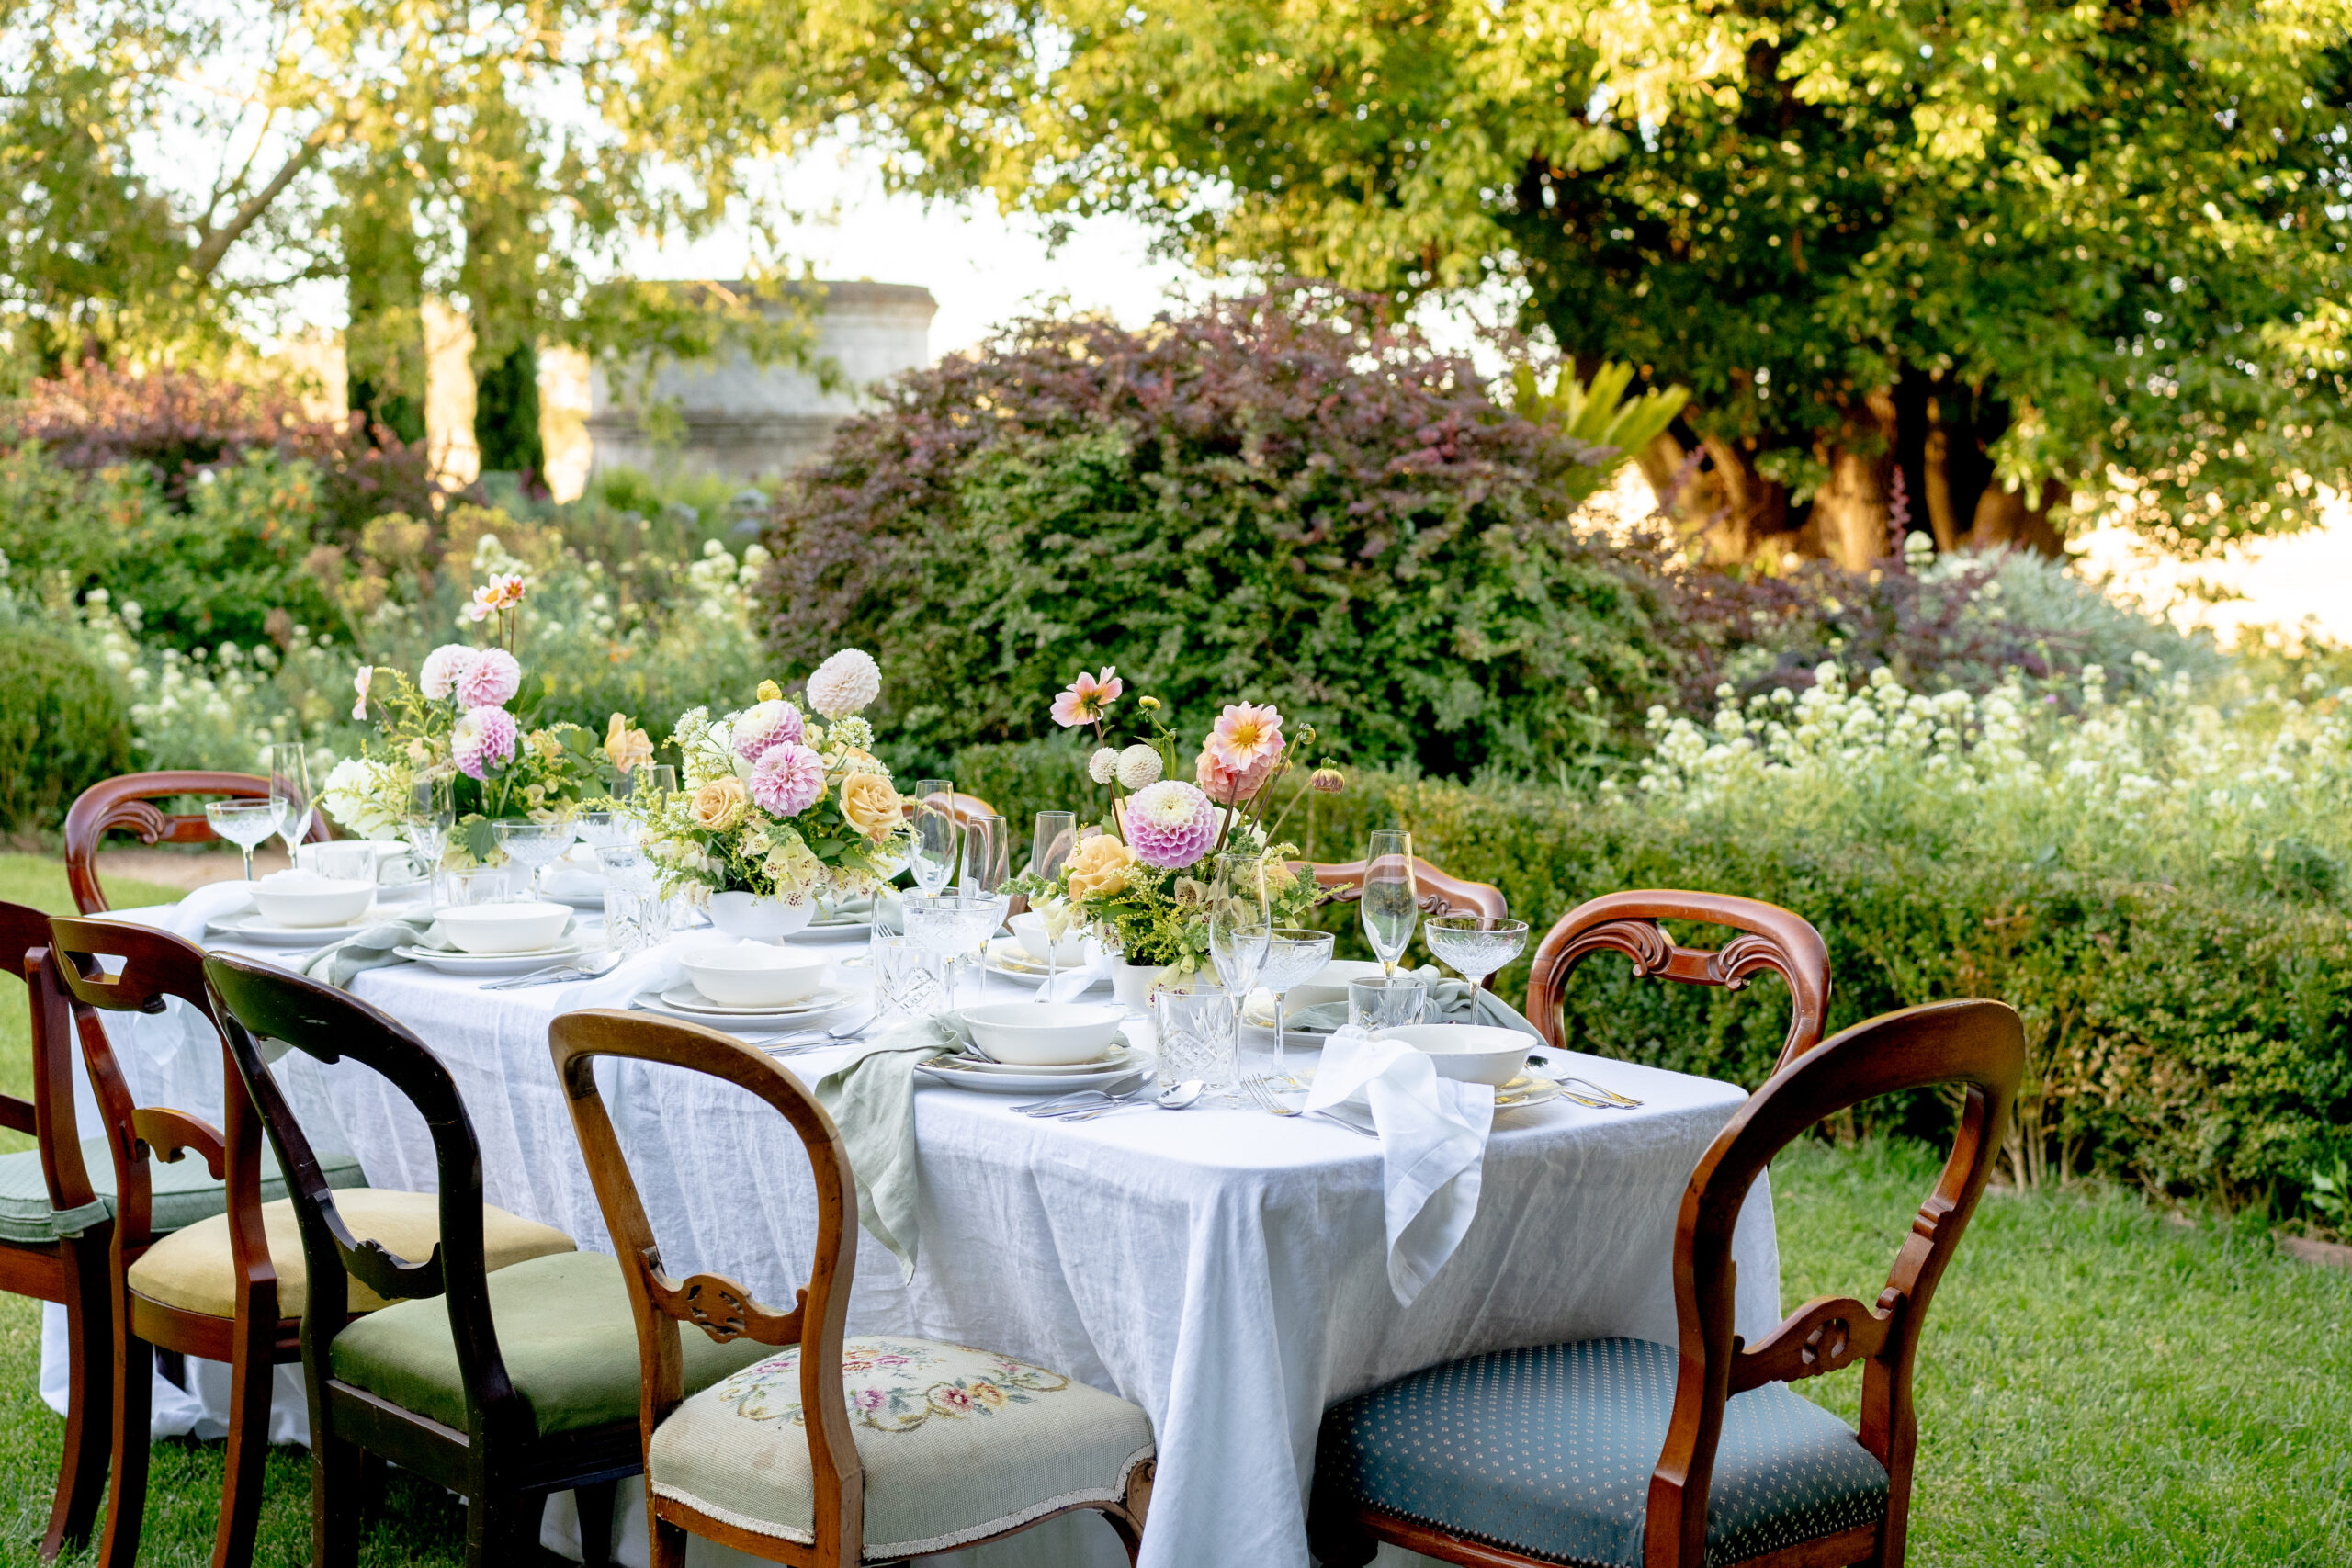 Table with flowers and chairs